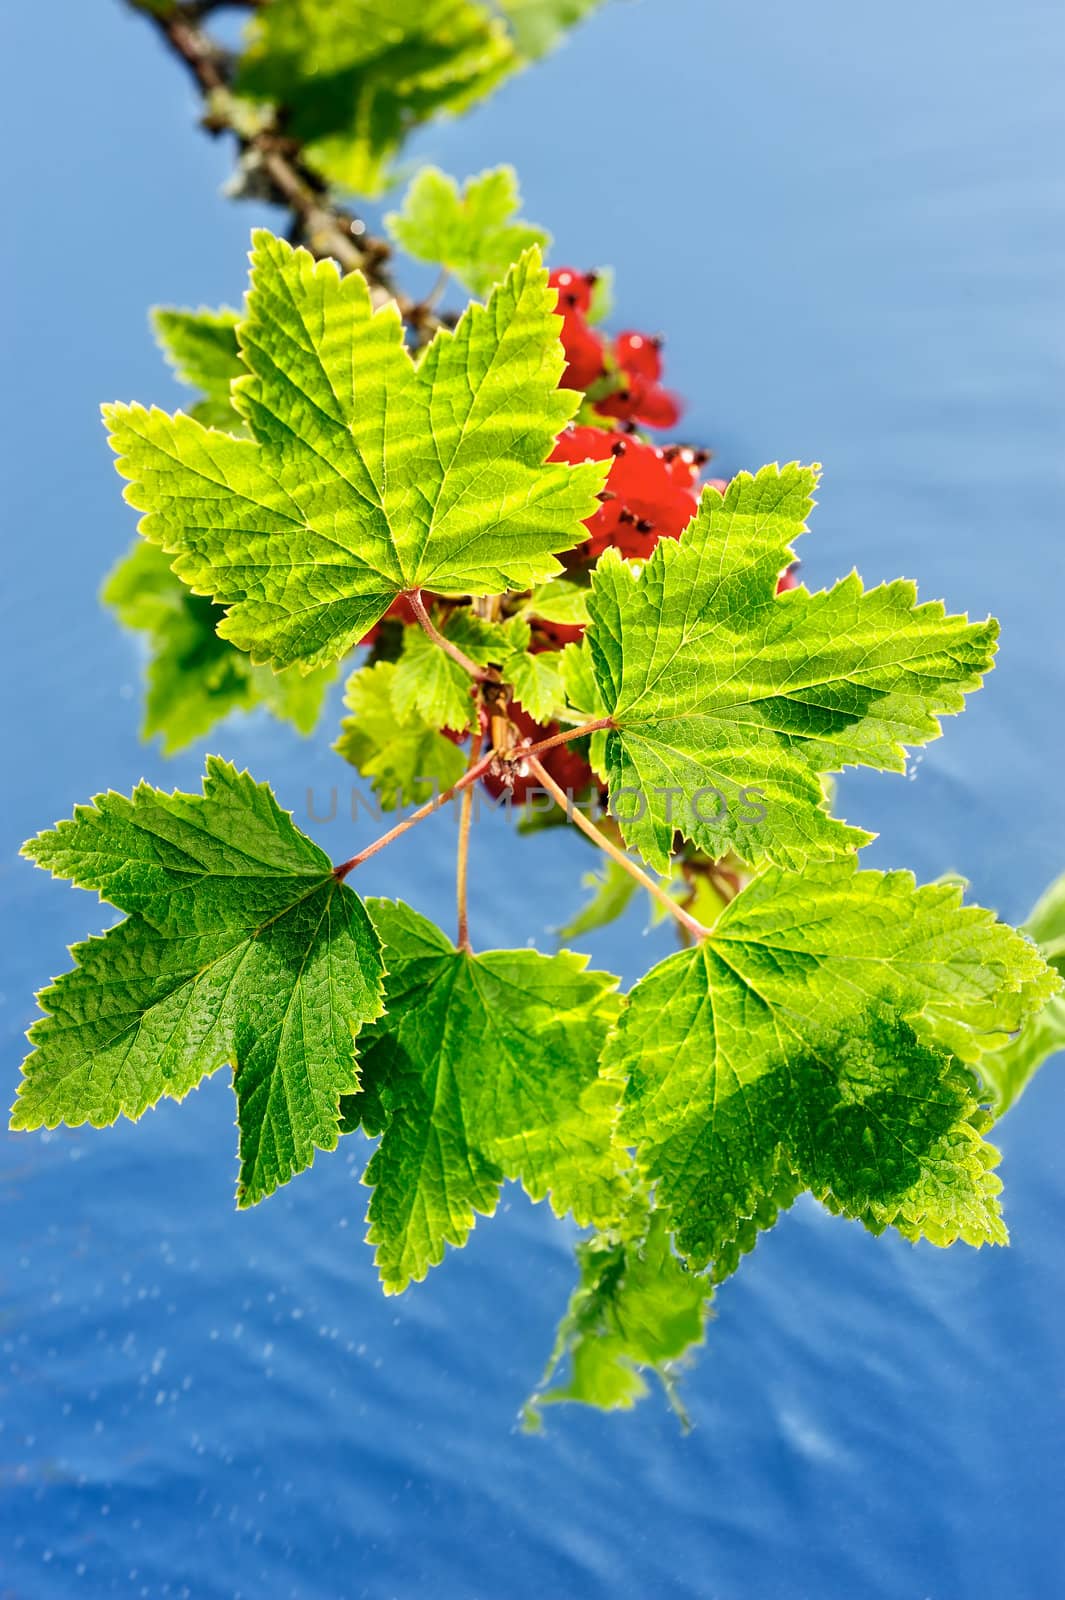 Sprout with leaves and red berries on the surface of the water